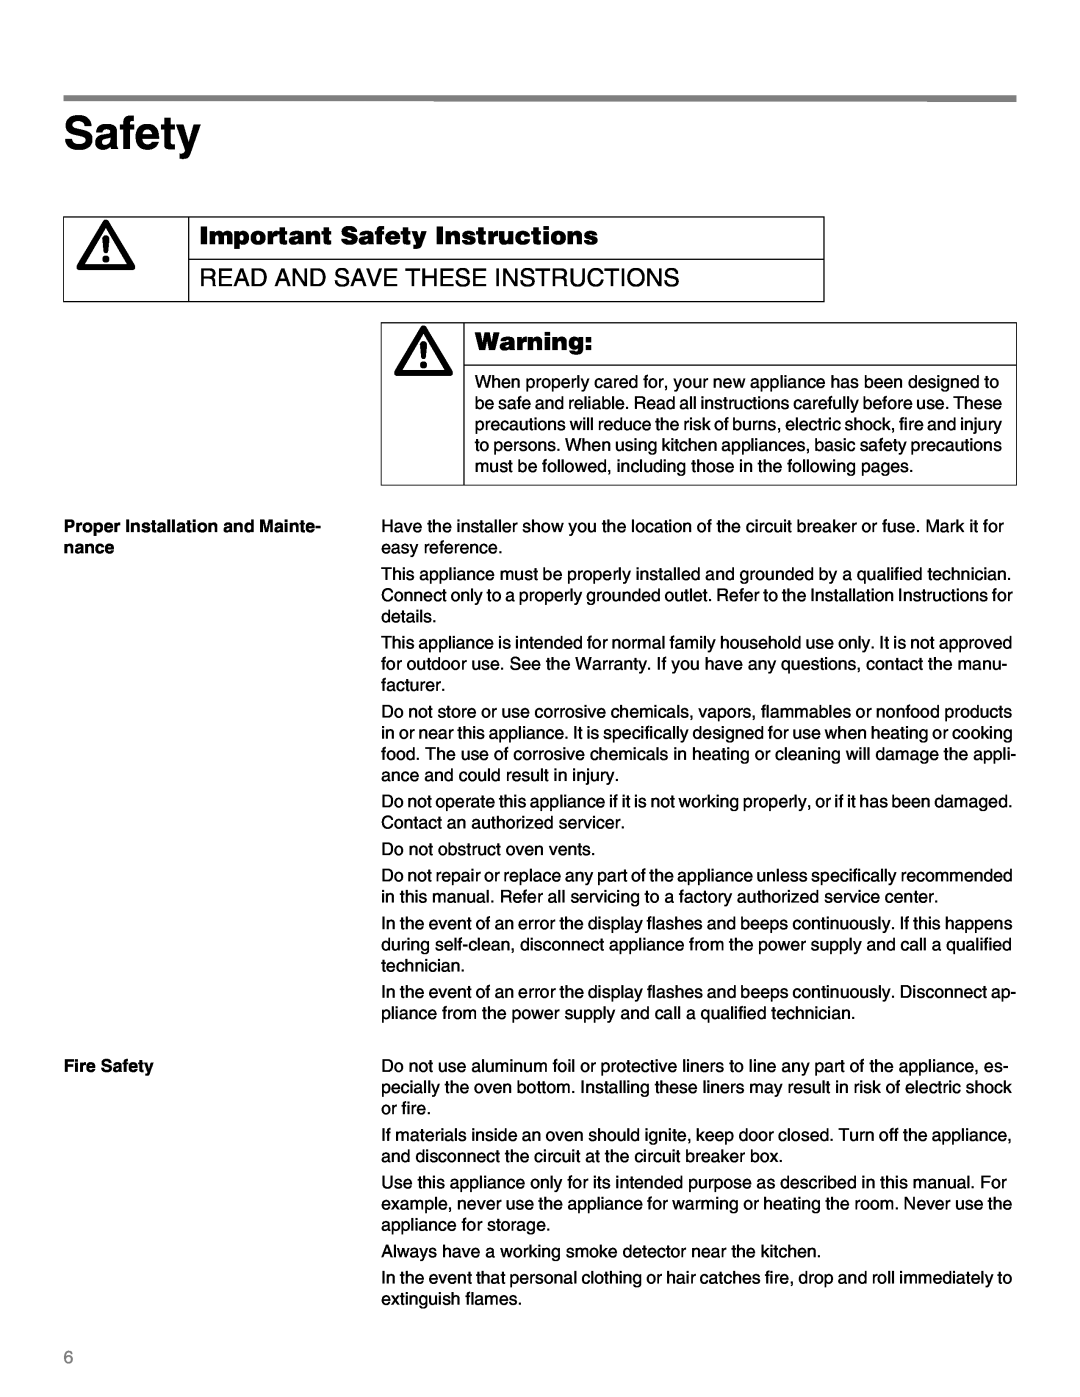 Thermador M271E, M301E manual Read And Save These Instructions, Proper Installation and Mainte, nance, Fire Safety 